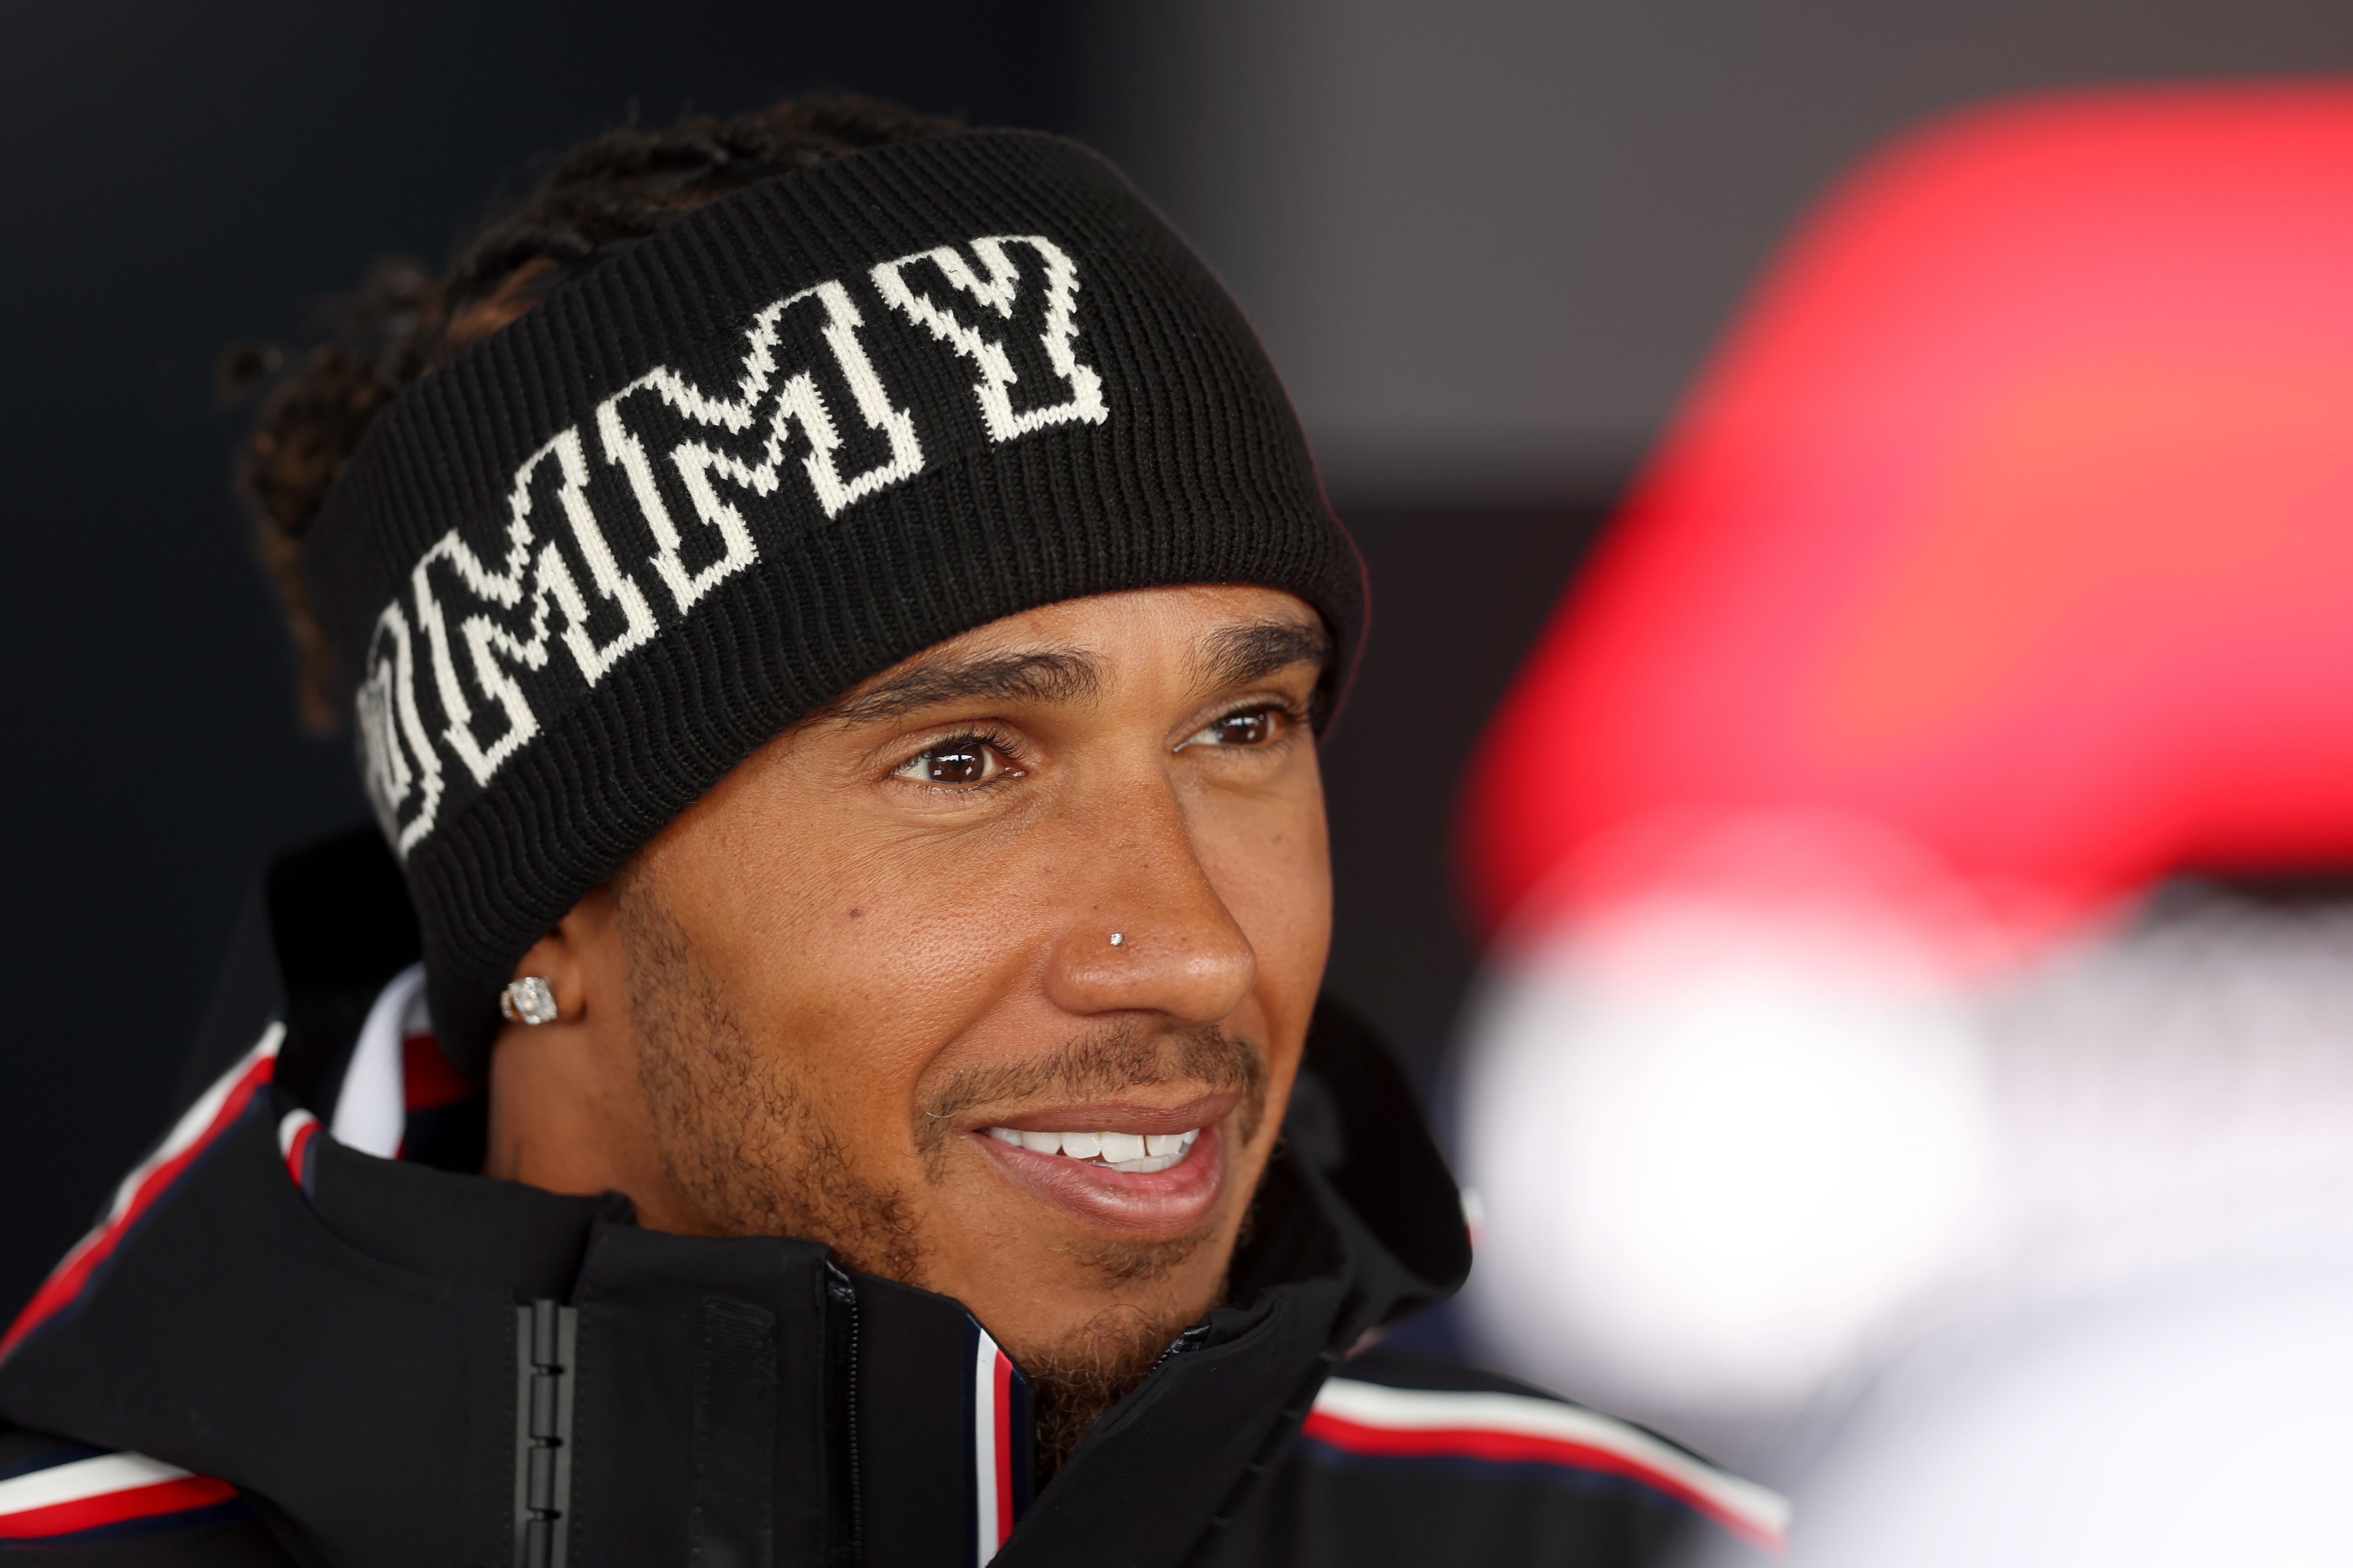 Hamilton is targeting P2 in the drivers’ championship this season